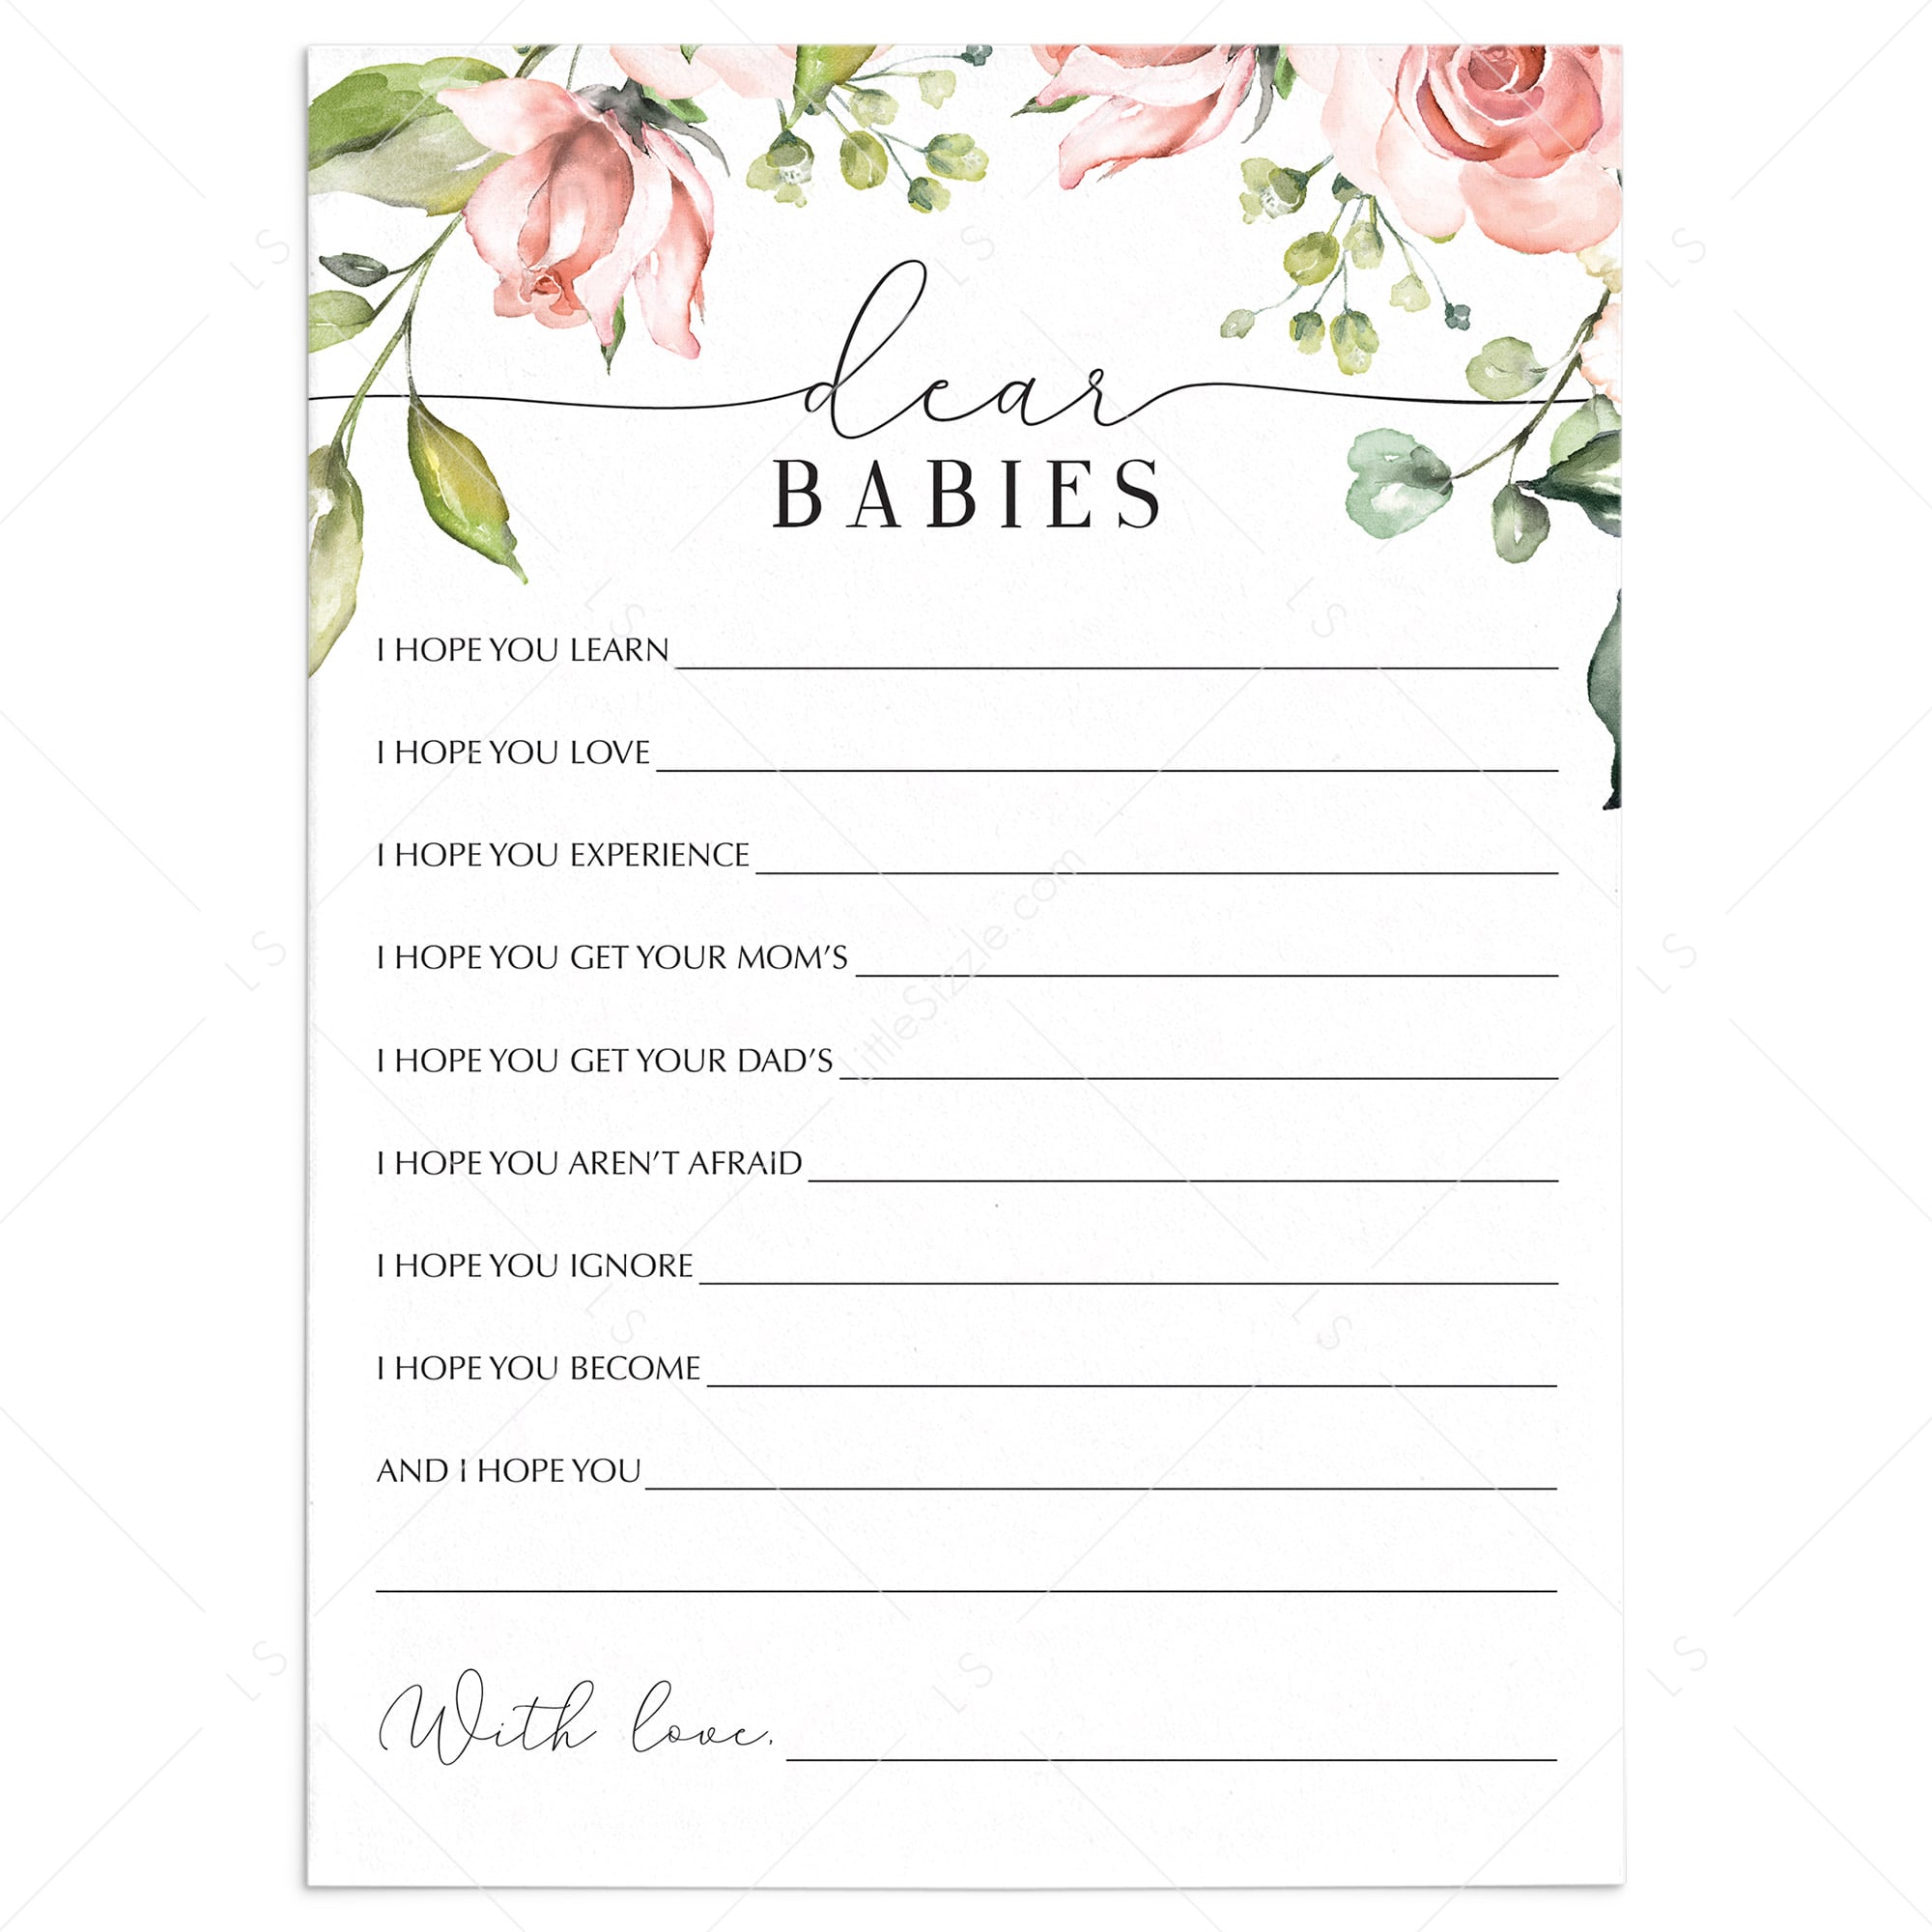 Dear Babies baby shower games Floral | Instant Donwload – LittleSizzle